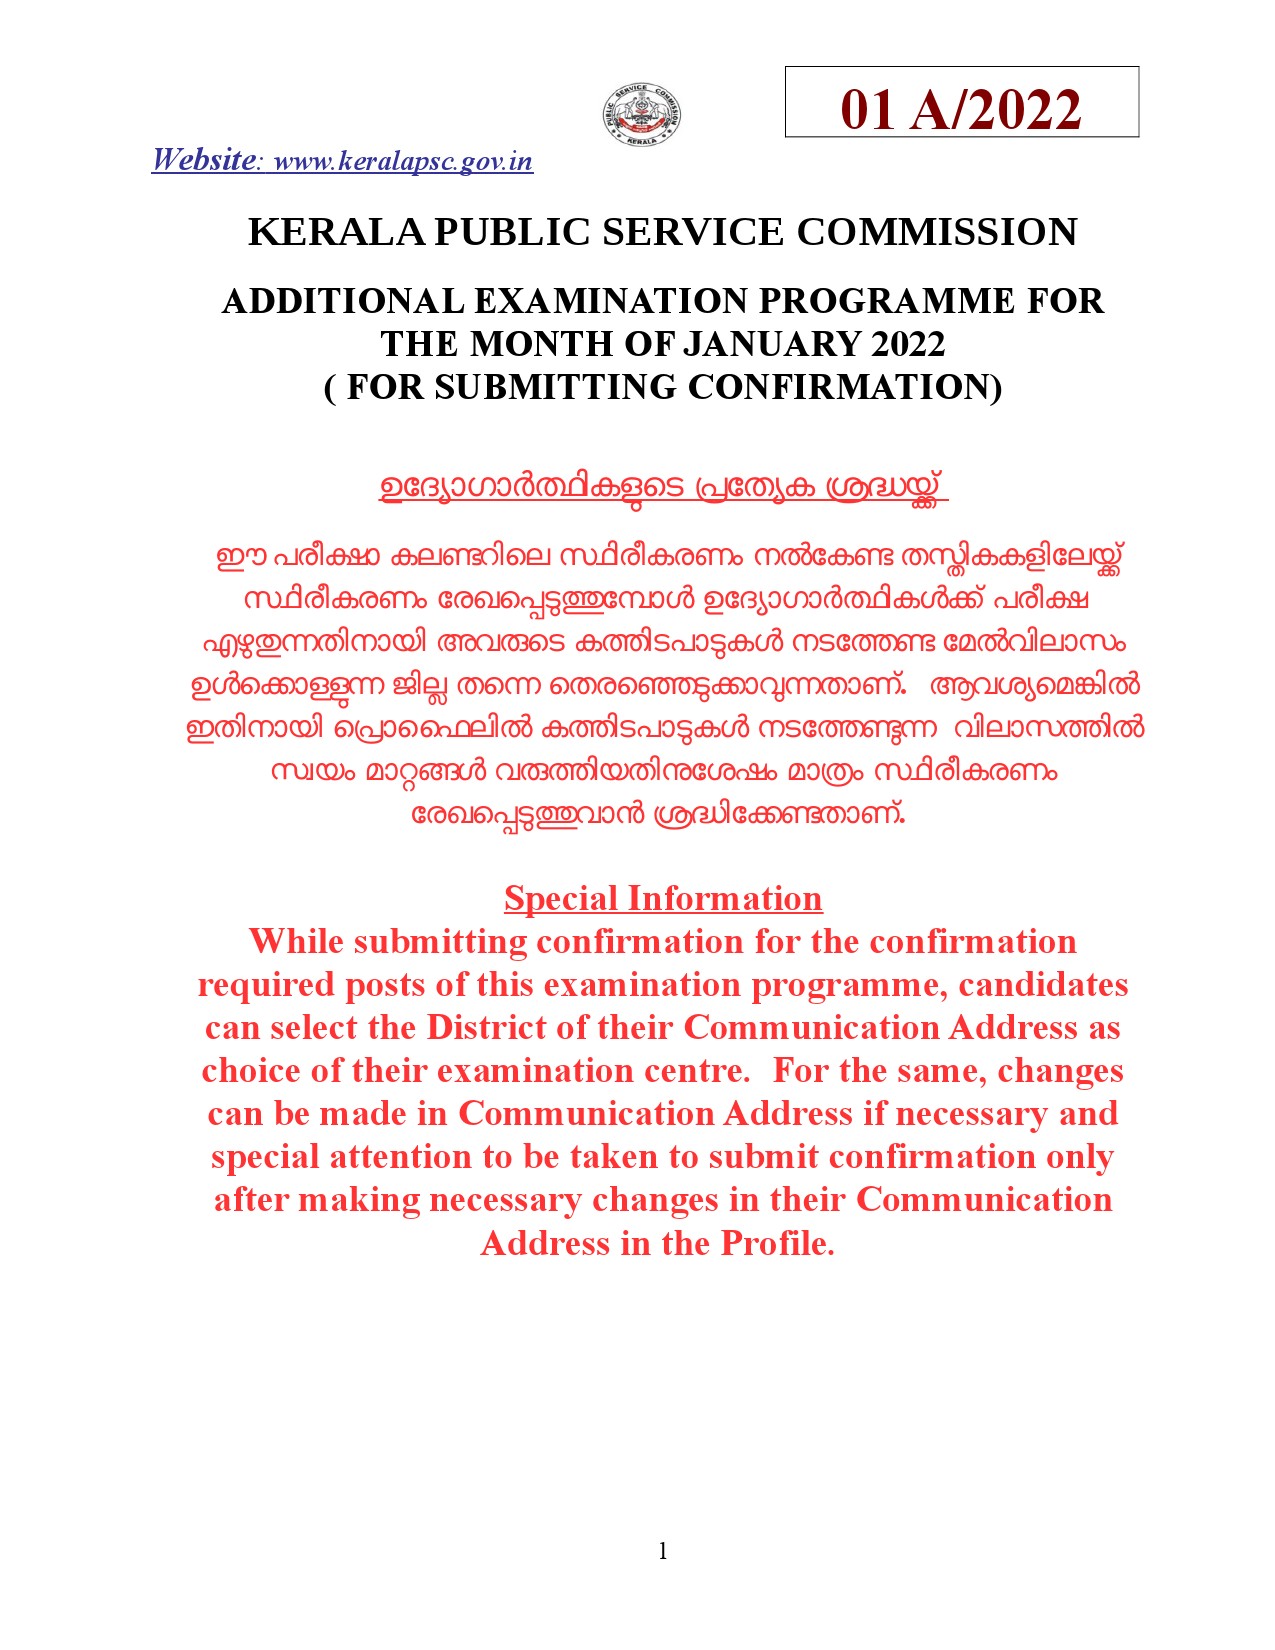 KPSC Additional Examination Programme For The Month Of January 2022 - Notification Image 1